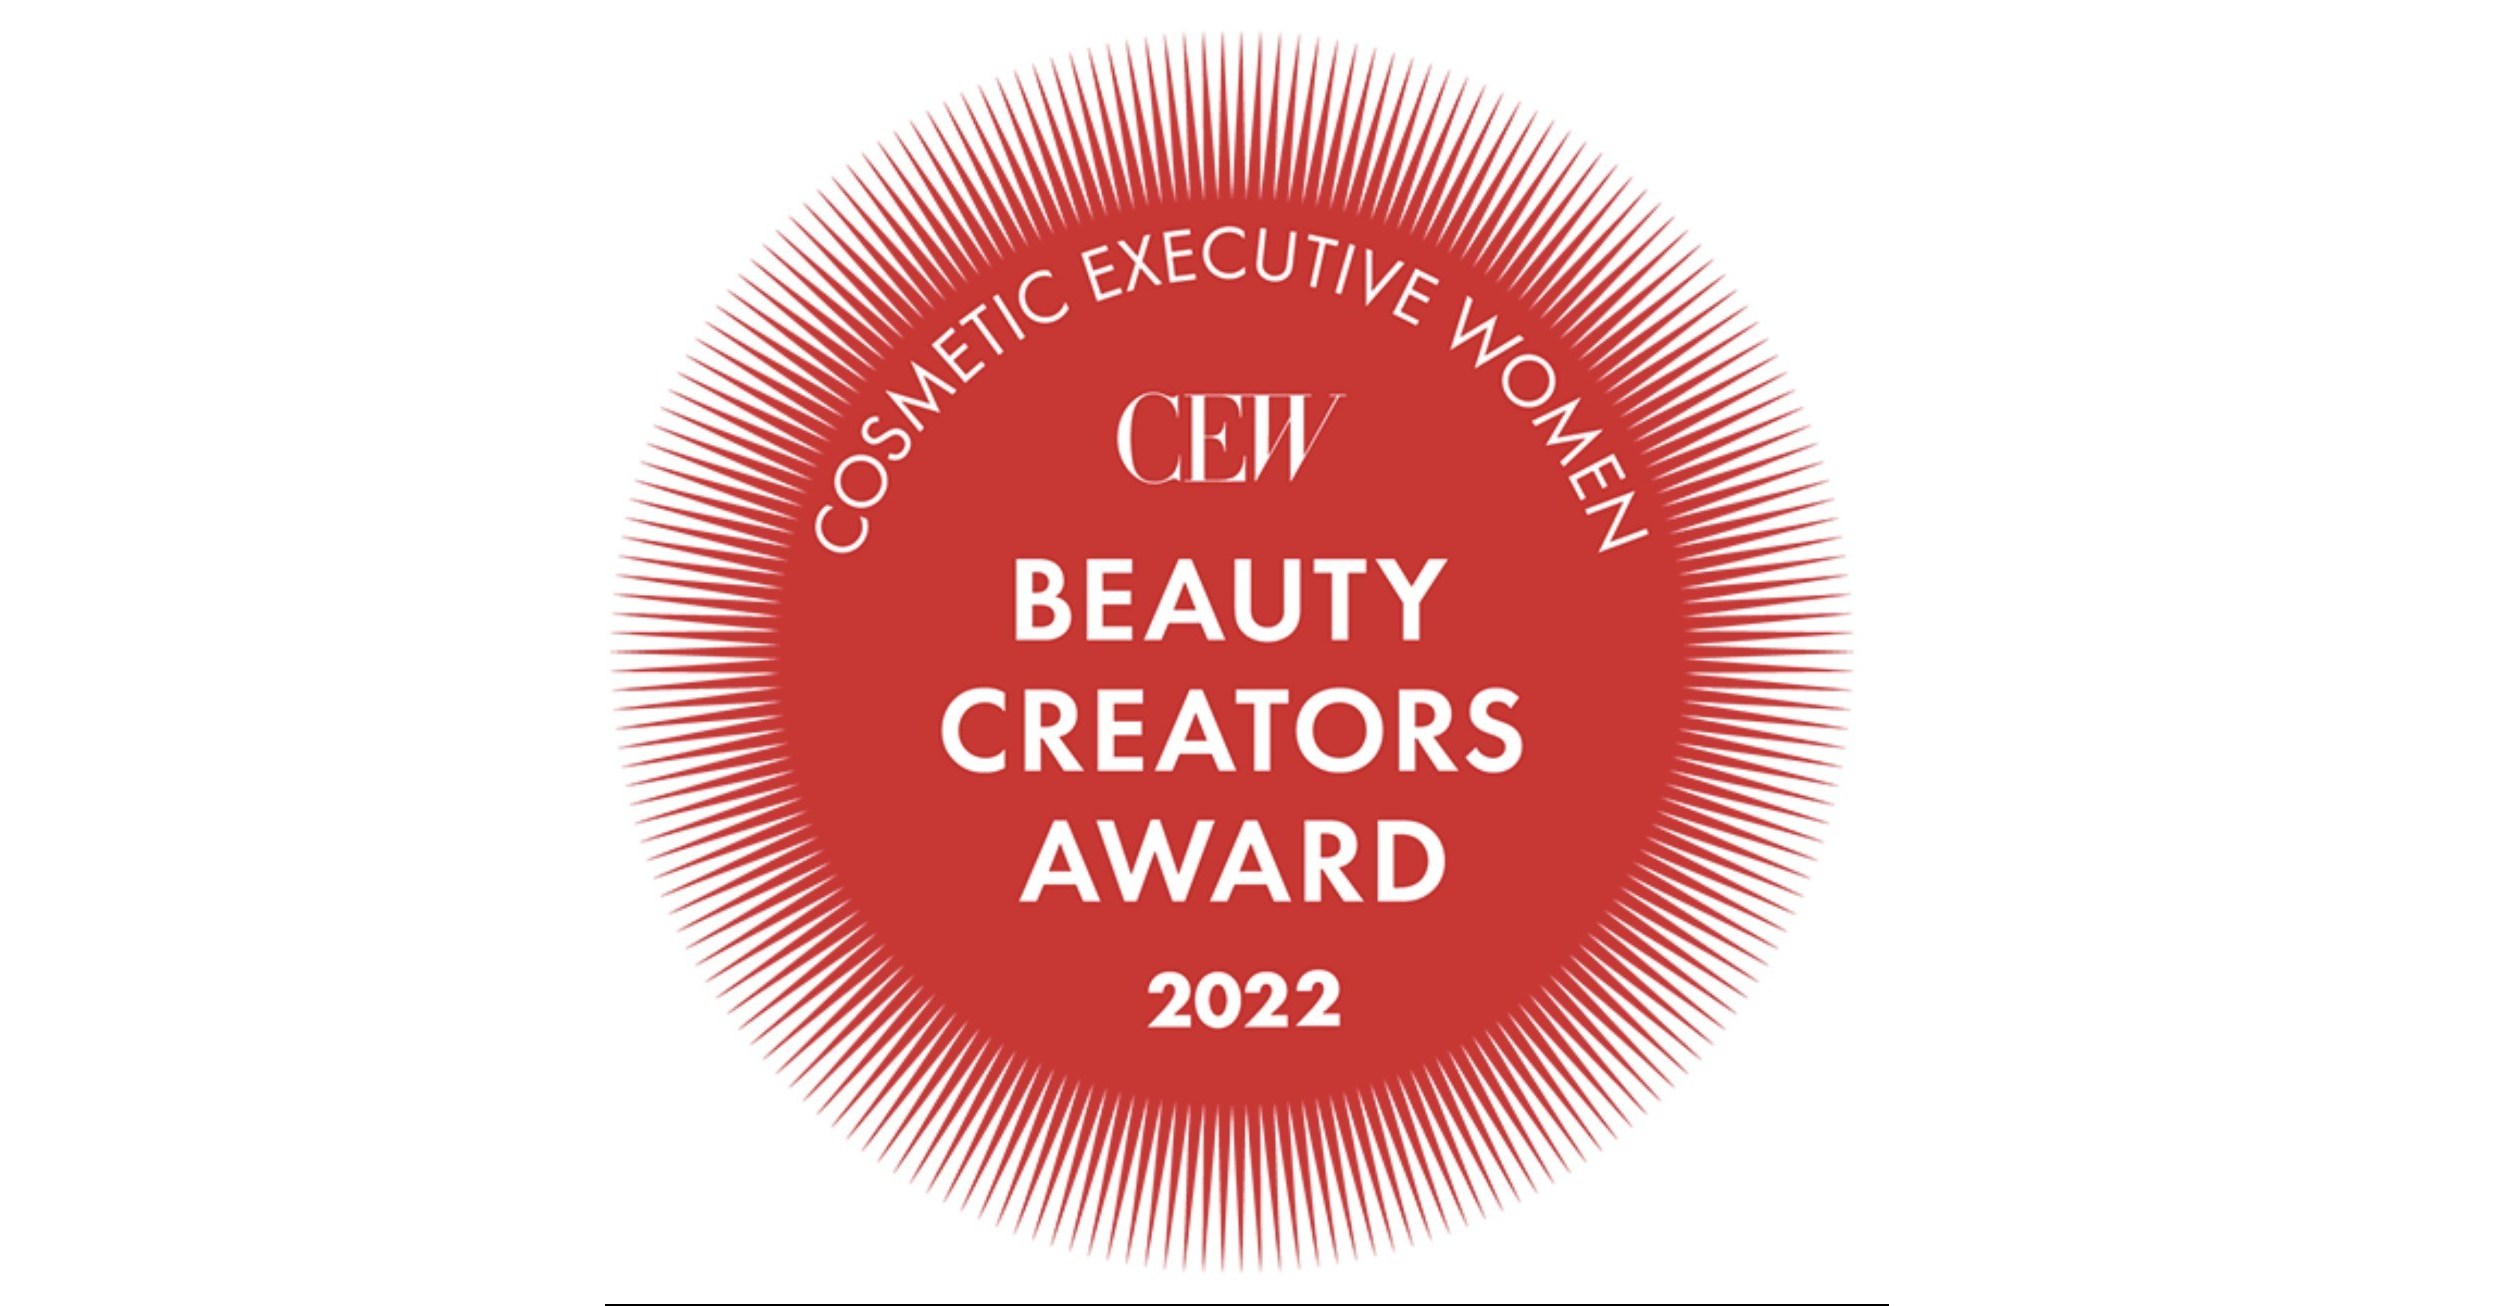 COSMETIC EXECUTIVE WOMEN (CEW) HONORS THE YEAR’S BEST IN BEAUTY